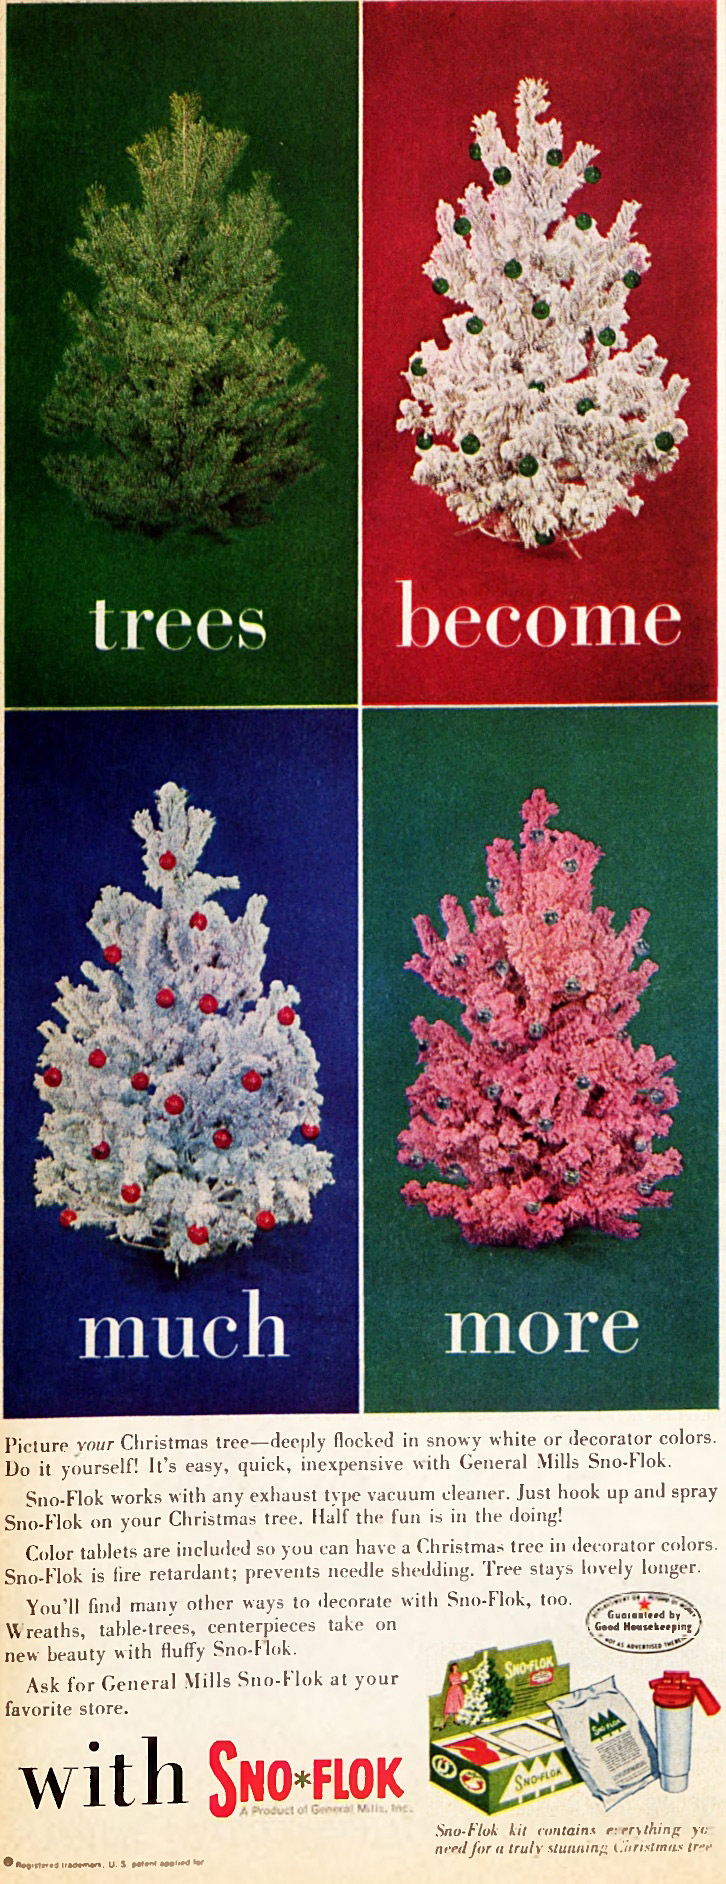 An ad for Sno-Flok, a spray that covers a Christmas tree with a snow-like substance.